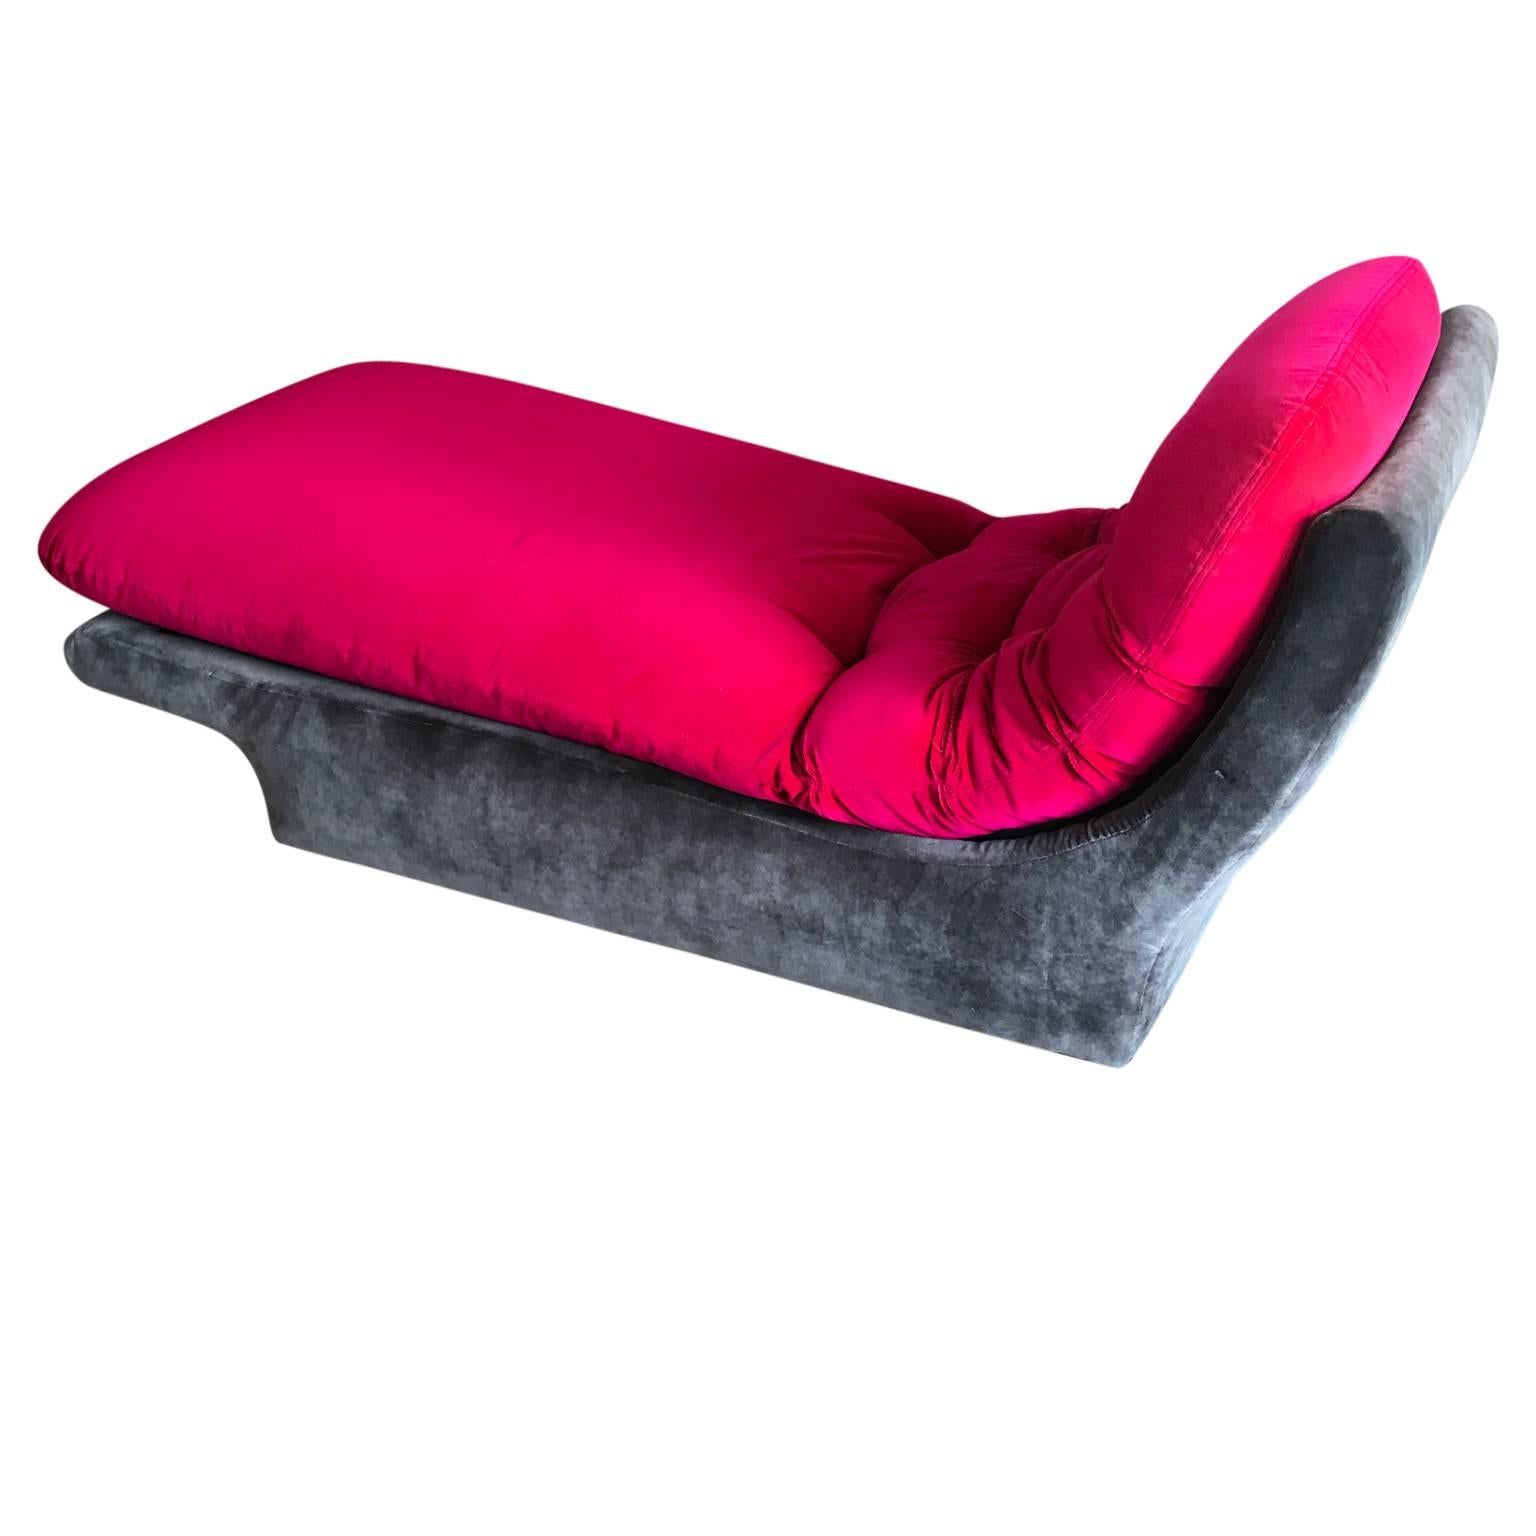 Modern Kagan style chaise lounge upholstered in pink and grey supple velvet by Modular group for Preview. The modern chaise has style exuding from all angles. The pink velvet is bold and changes color from all different angles of light. The chaise